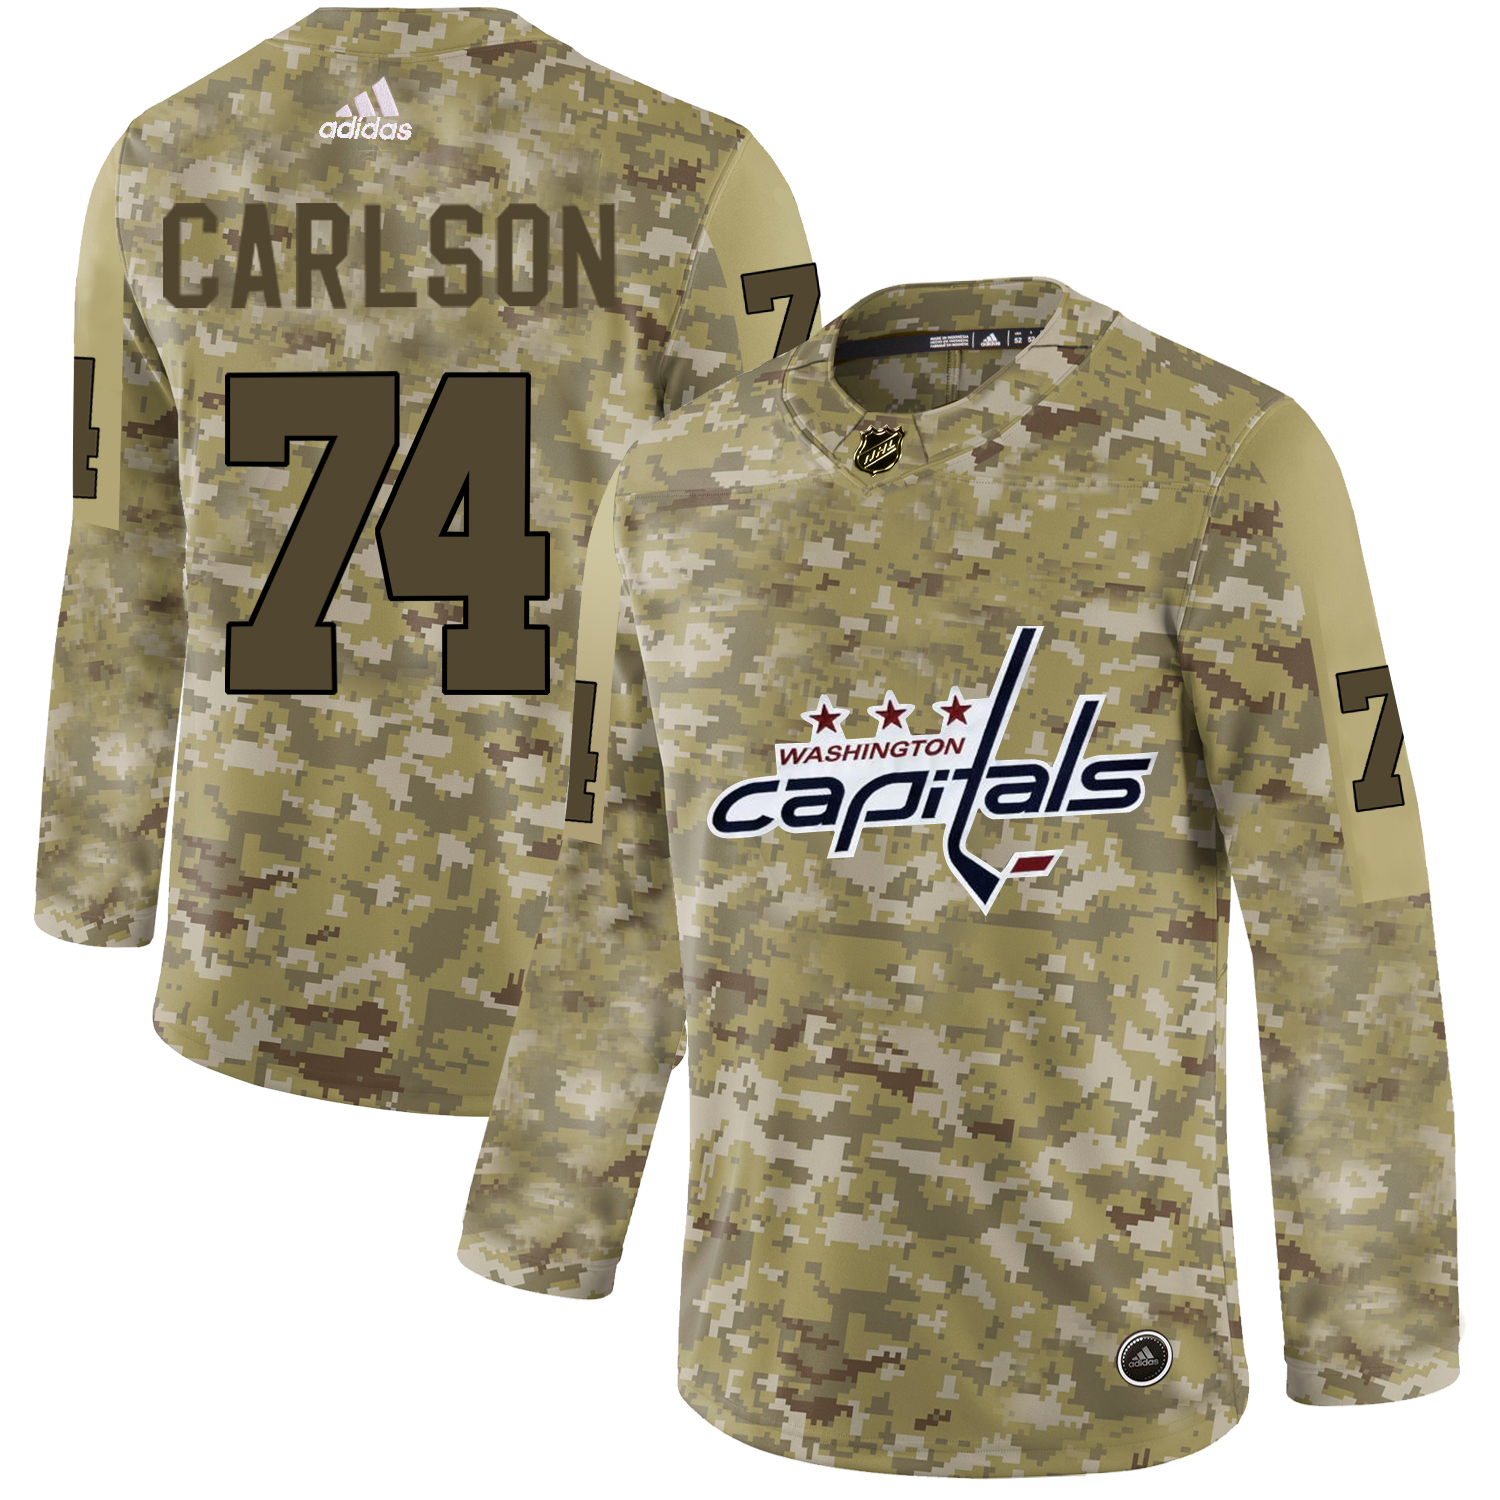 Adidas Capitals #74 John Carlson Camo Authentic Stitched NHL Jersey